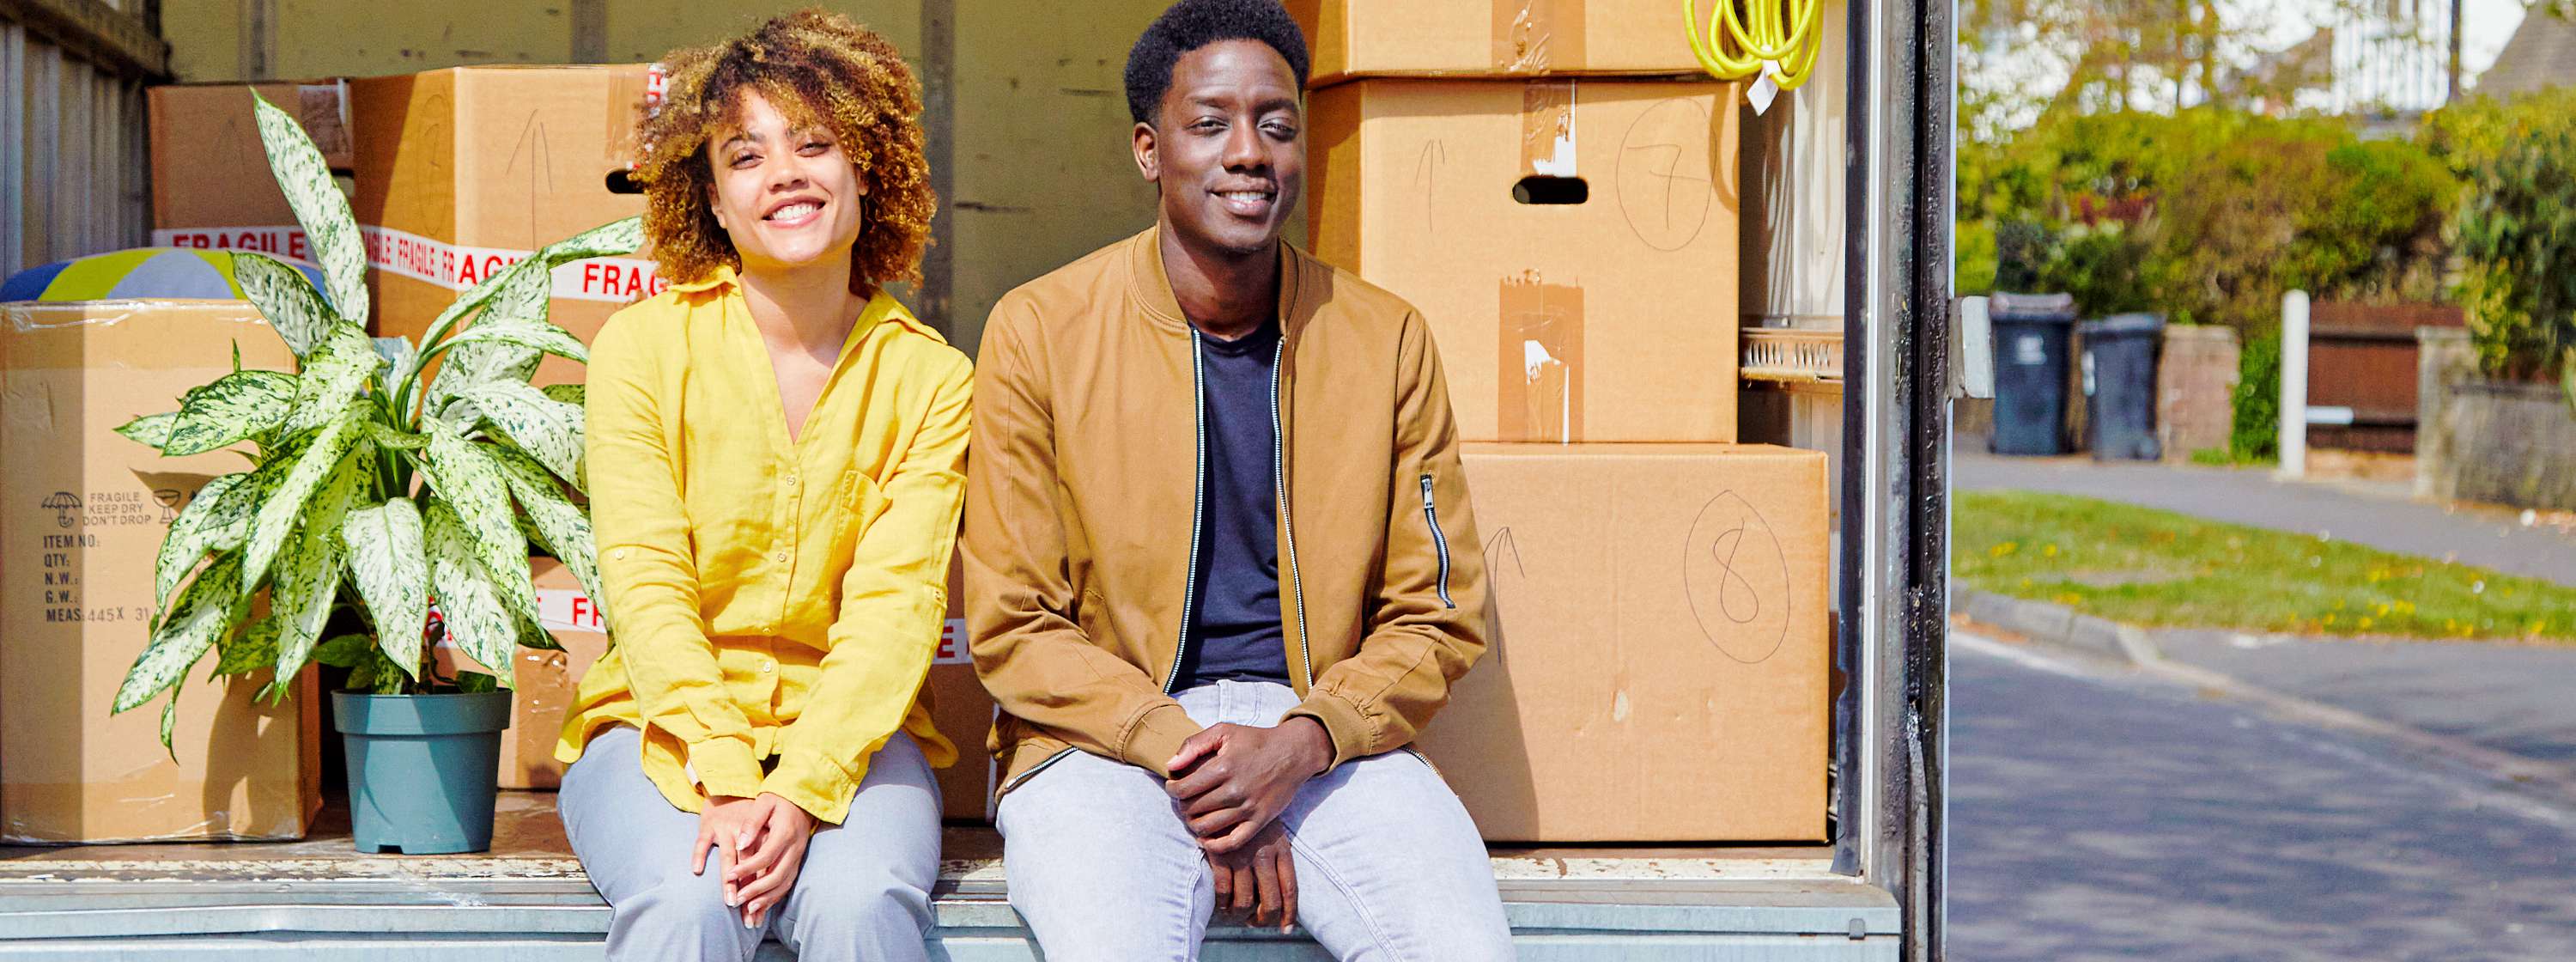 Young couple smiling and sitting in the back of an open moving van. It's a sunny day and the van is full of cardboard boxes.